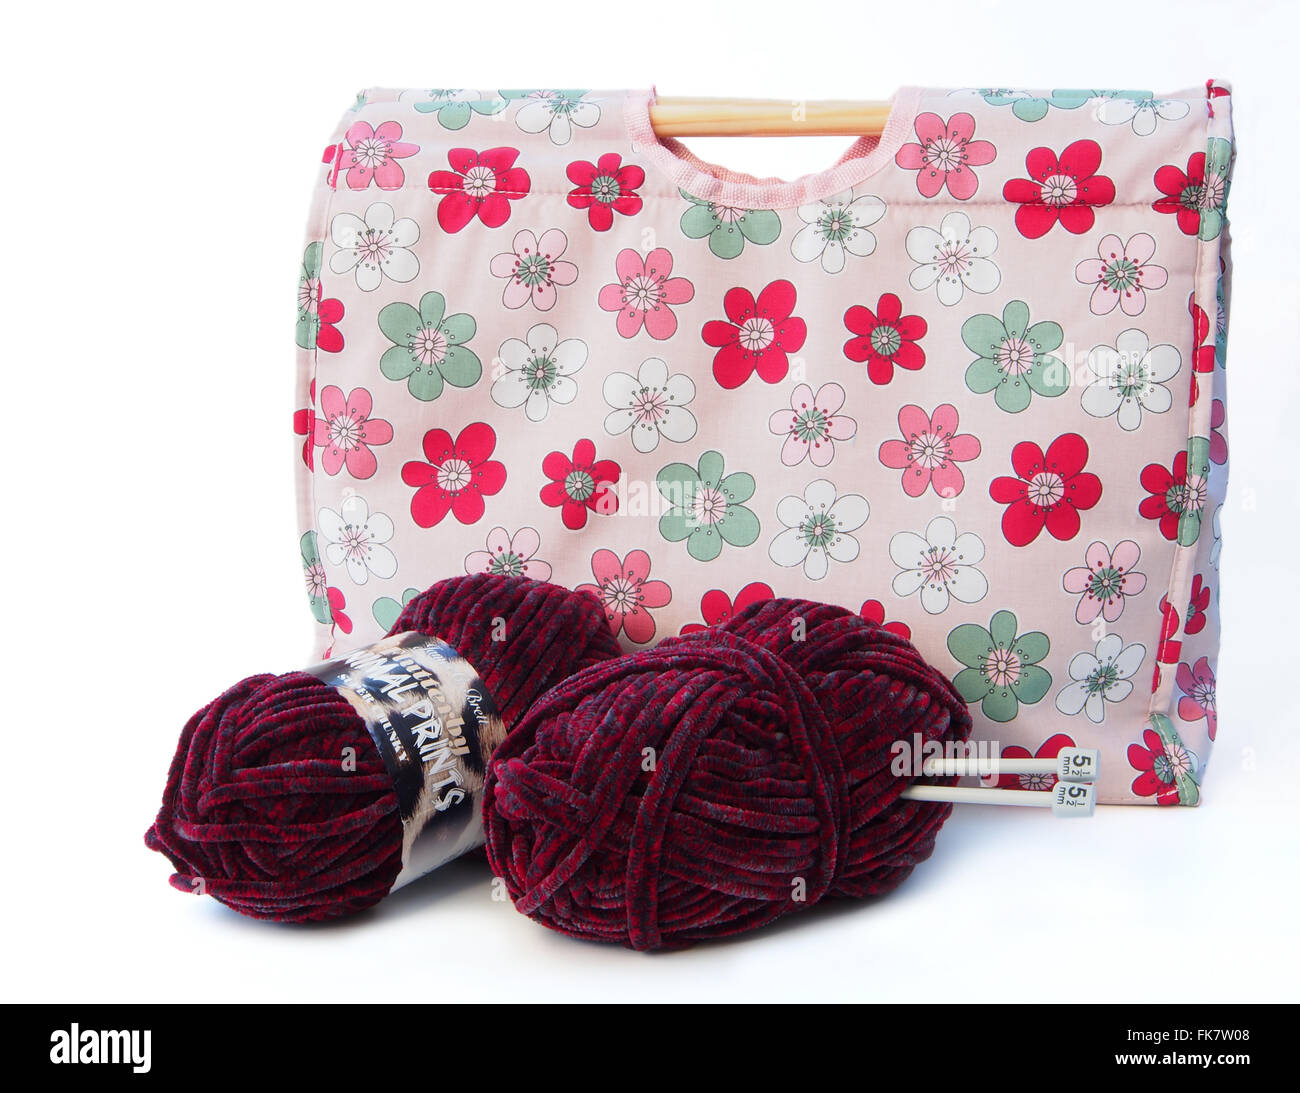 Pink flower patterned knitting / craft bag with knitting needles, and two balls of burgundy coloured wool on a white background. Stock Photo